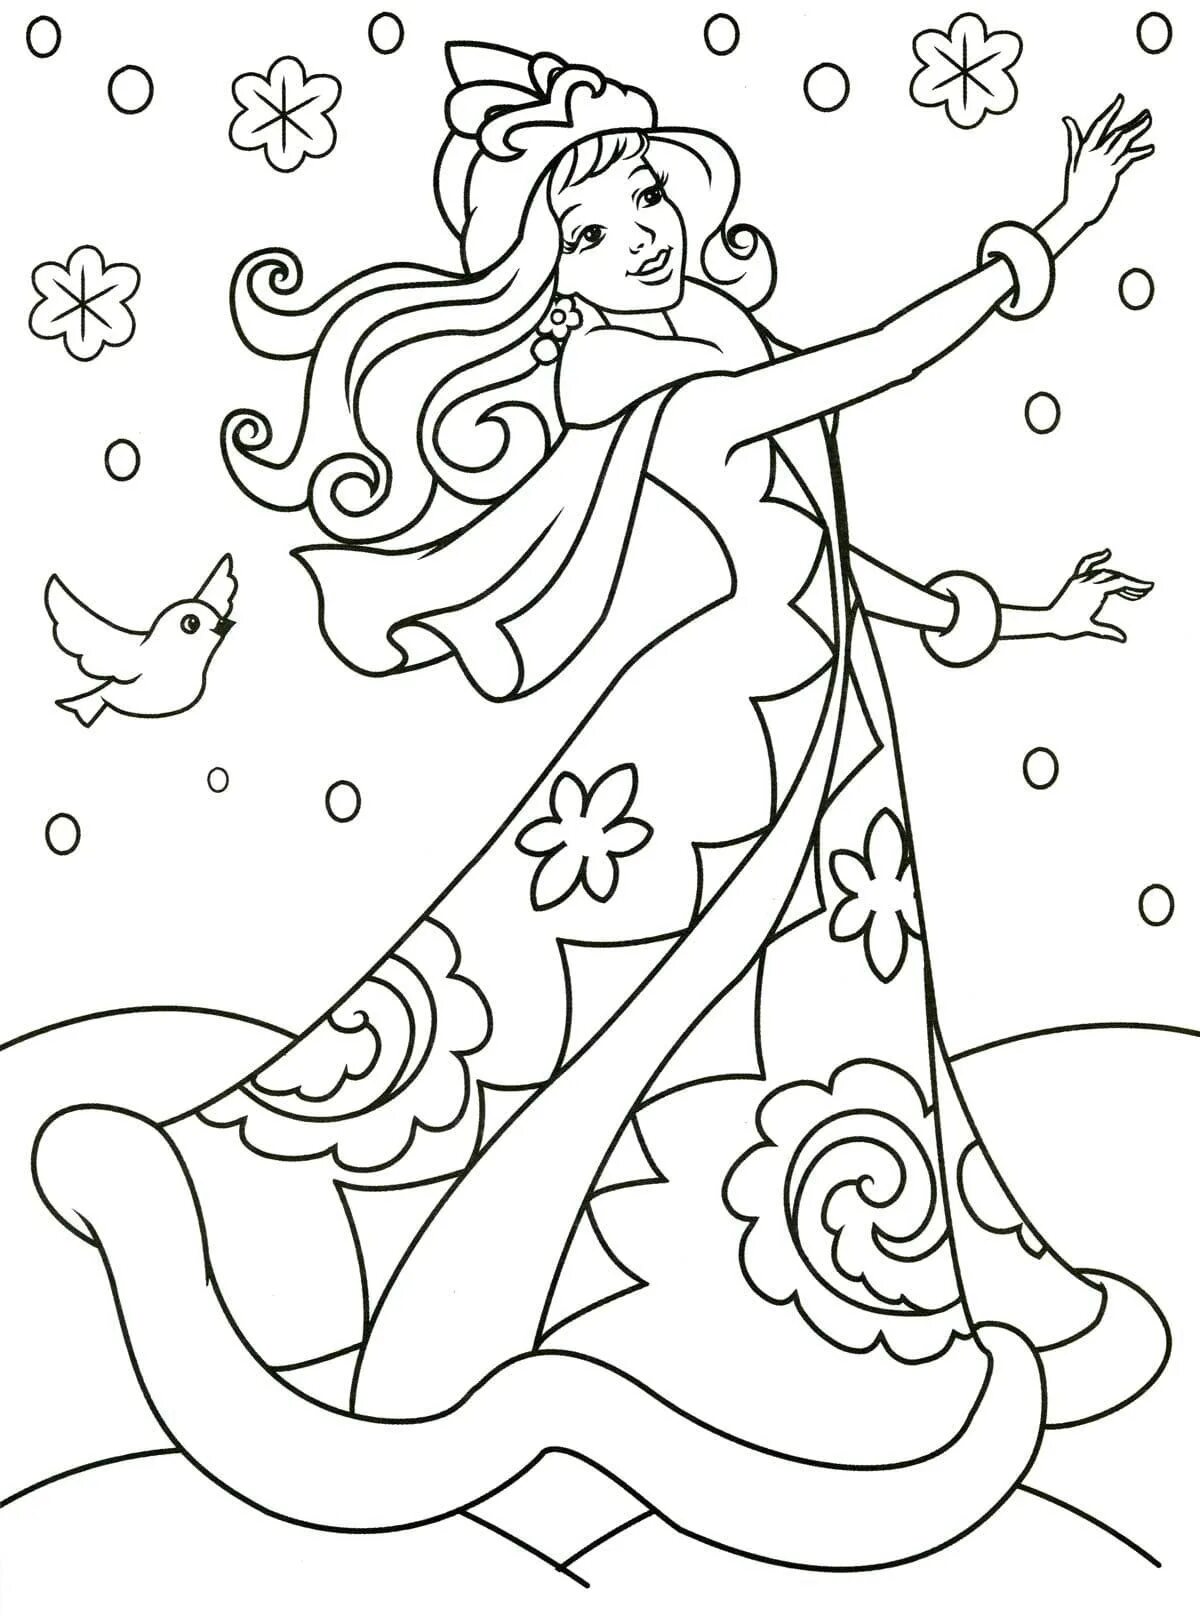 Dazzling Christmas coloring book for girls 8 years old